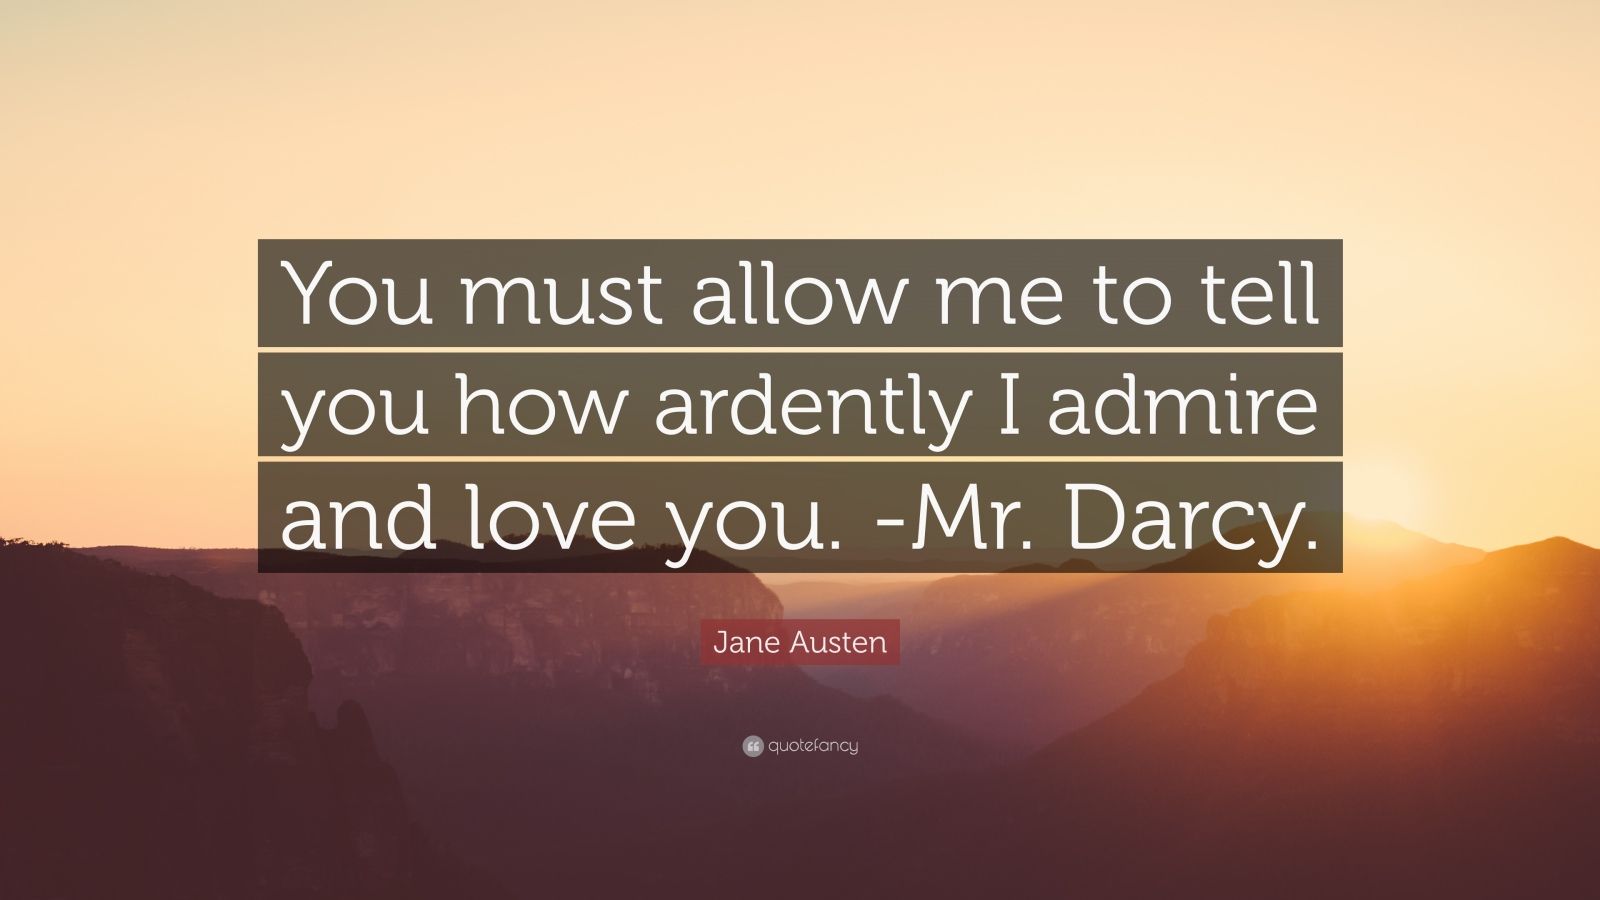 jane austen quote: "you must allow me to tell you how ardently i